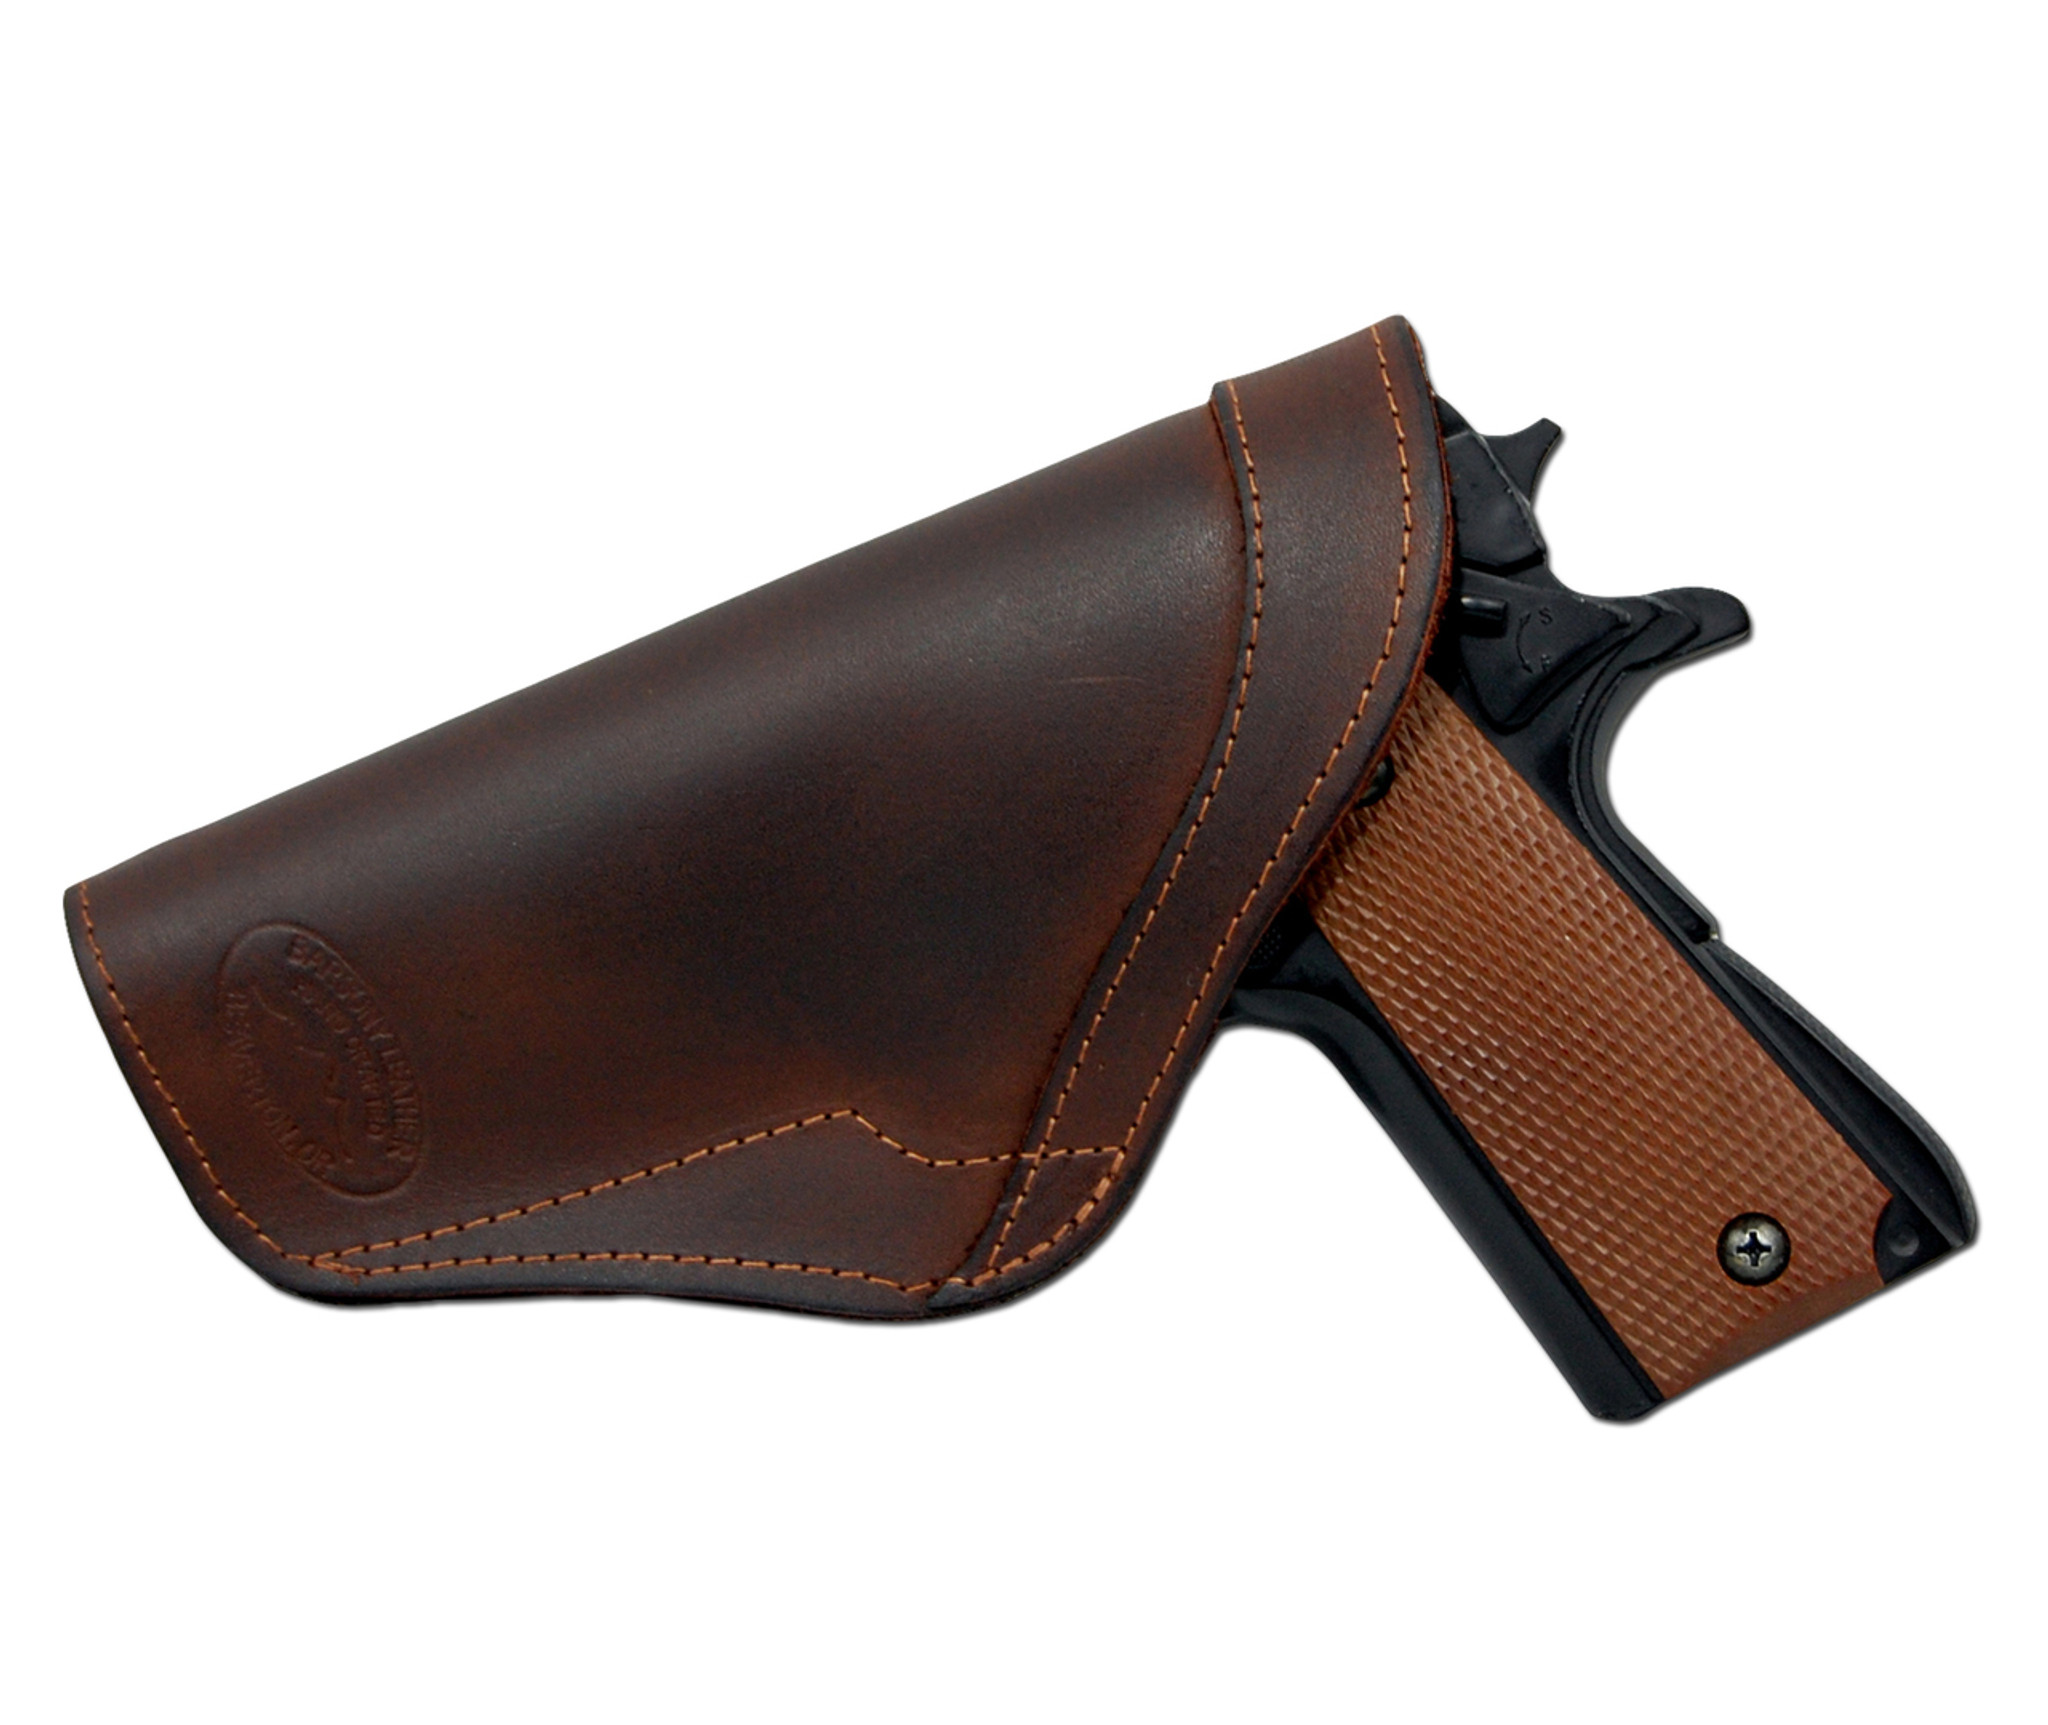 Light Brown Leather Pocket Organizer - Barsony Holsters